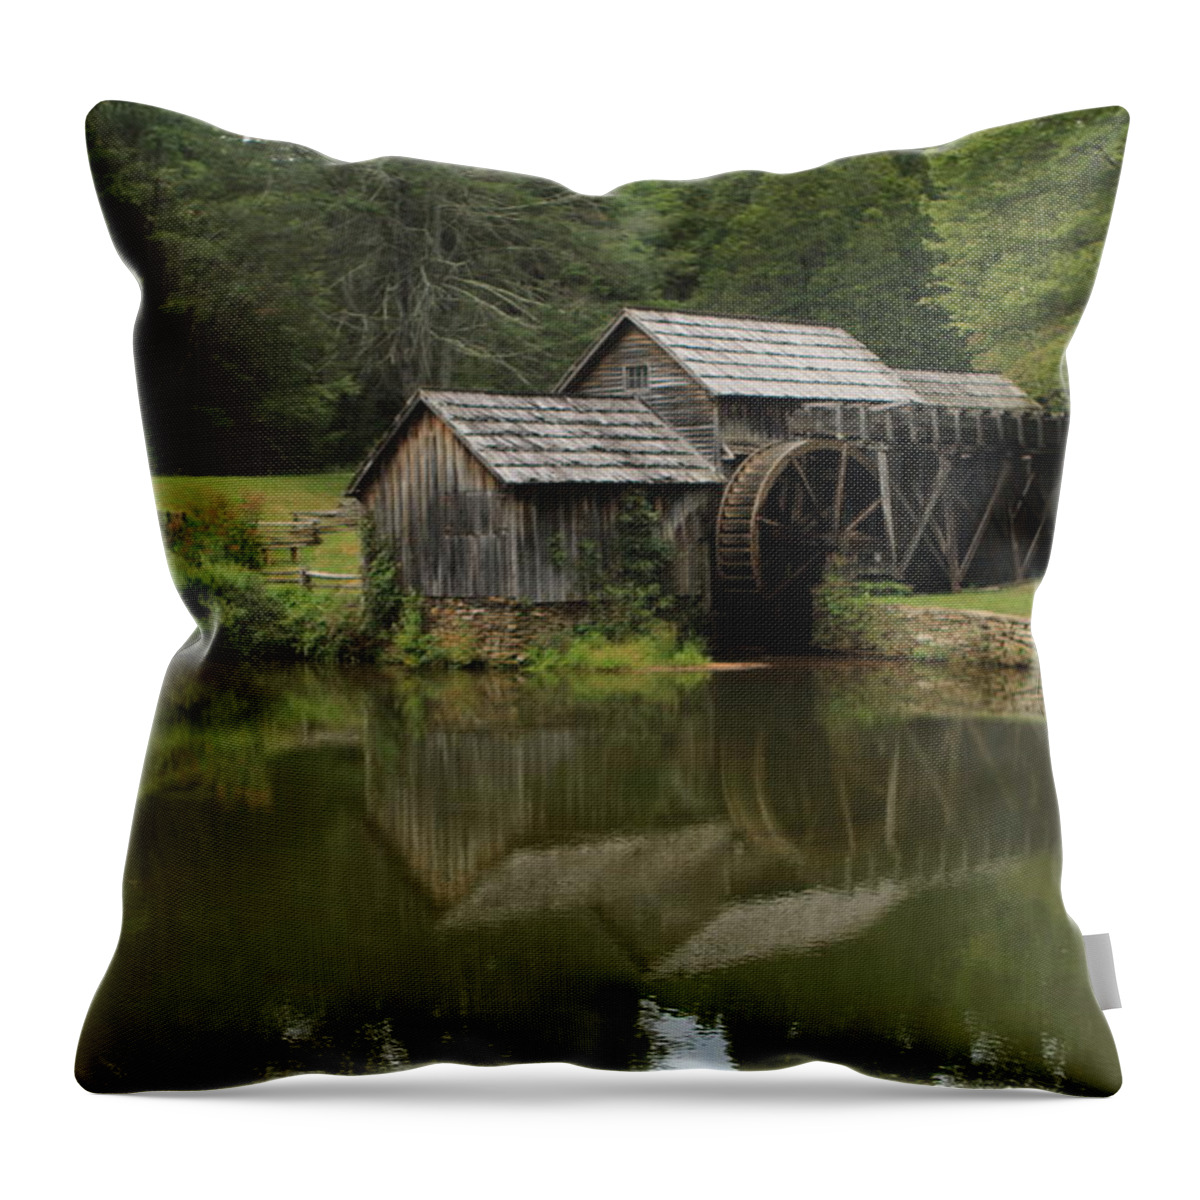 Mill Throw Pillow featuring the photograph Historic Mill by Karen Ruhl